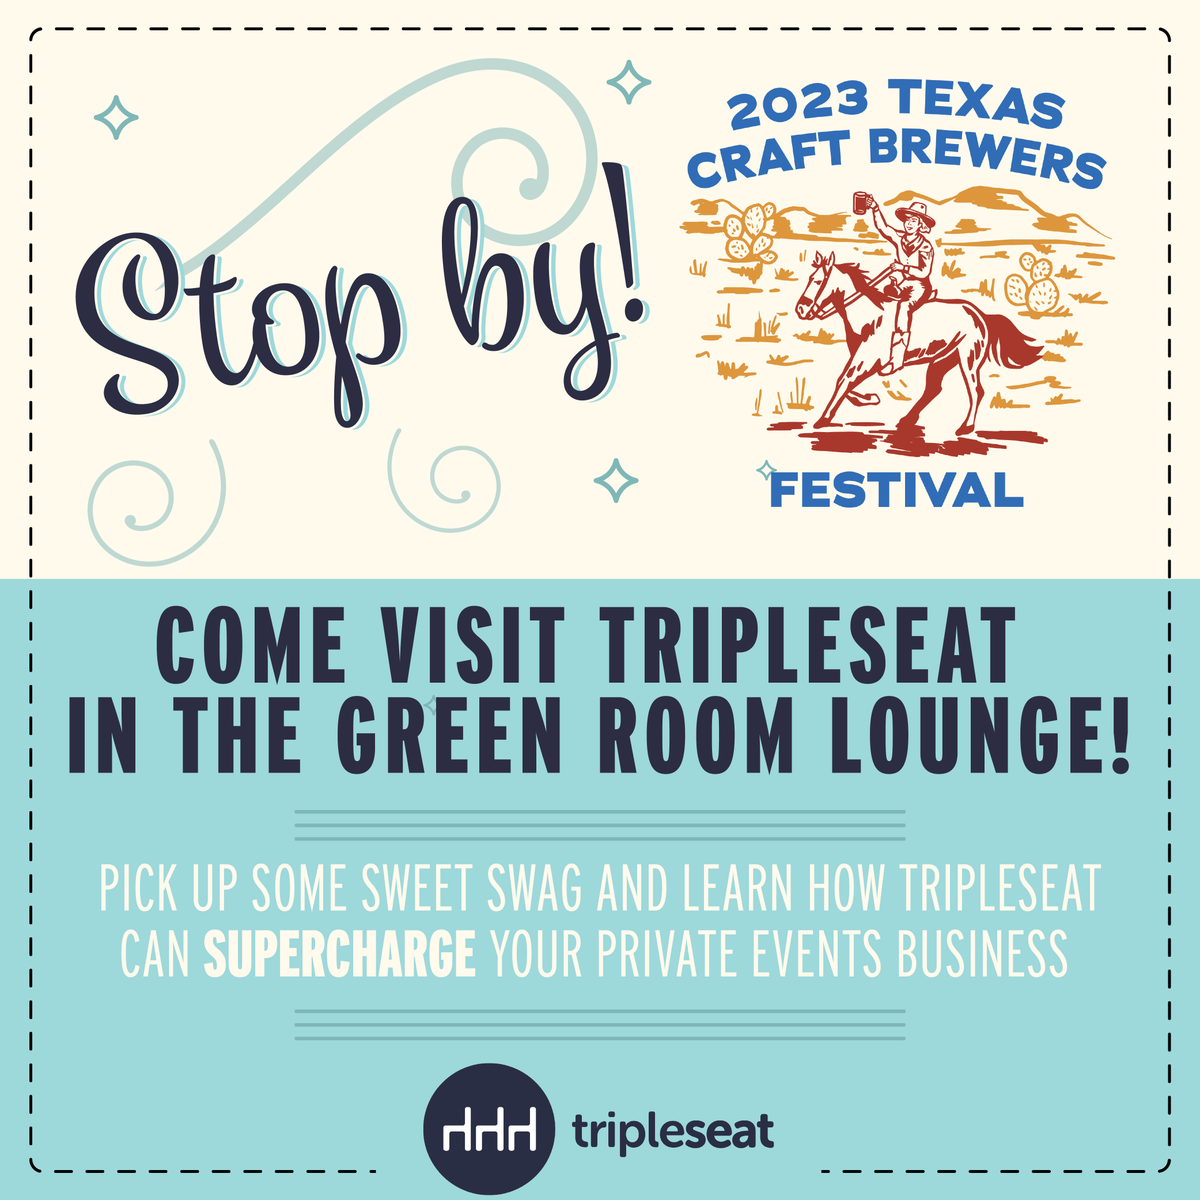 Will you be attending the #TexasCraftBrewersFestival this Saturday? Come meet the Tripleseat team in the Green Room Lounge to learn how our event management solution can help the private events program at your brewery grow. bit.ly/3ZrPzsk